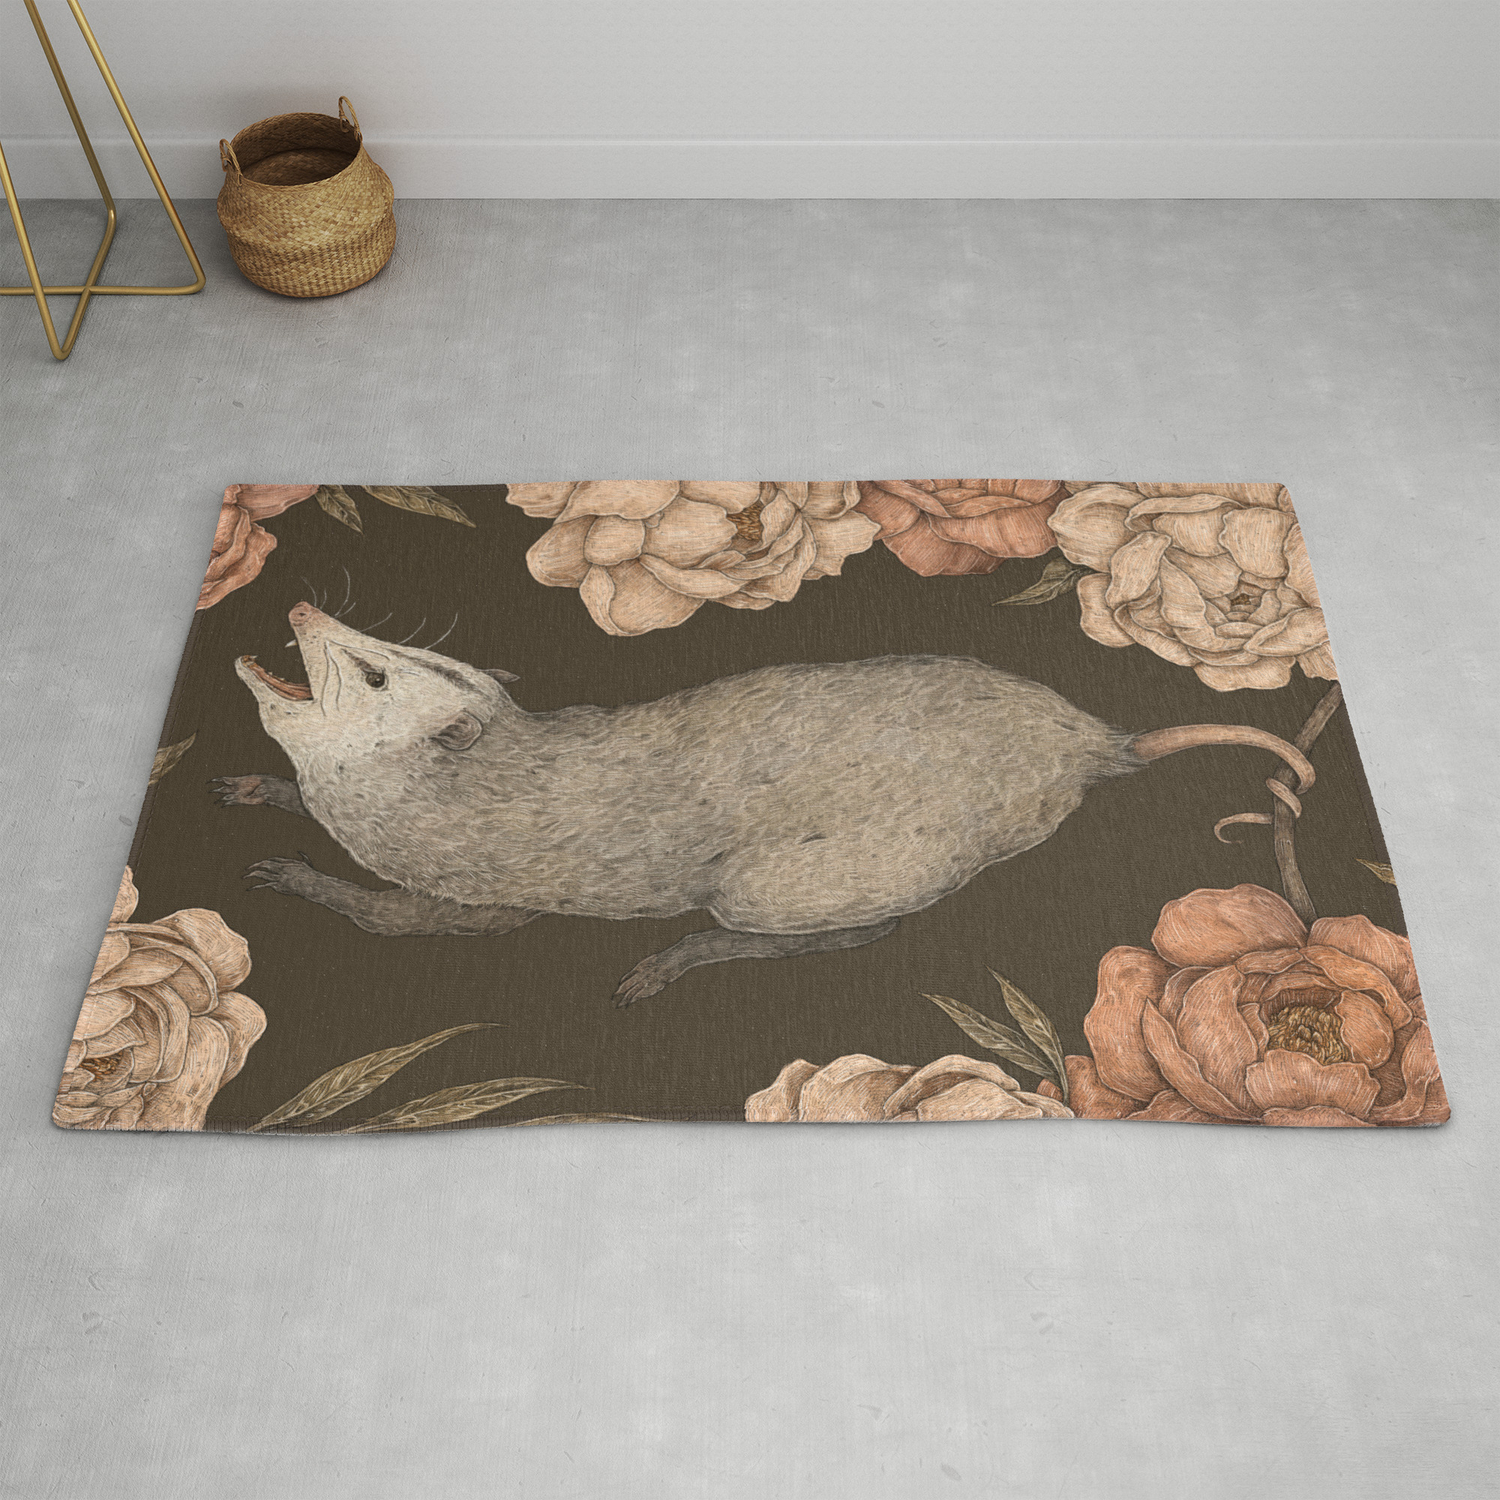 The Opossum And Peonies Rug By Jessica, Society6 Rug Review